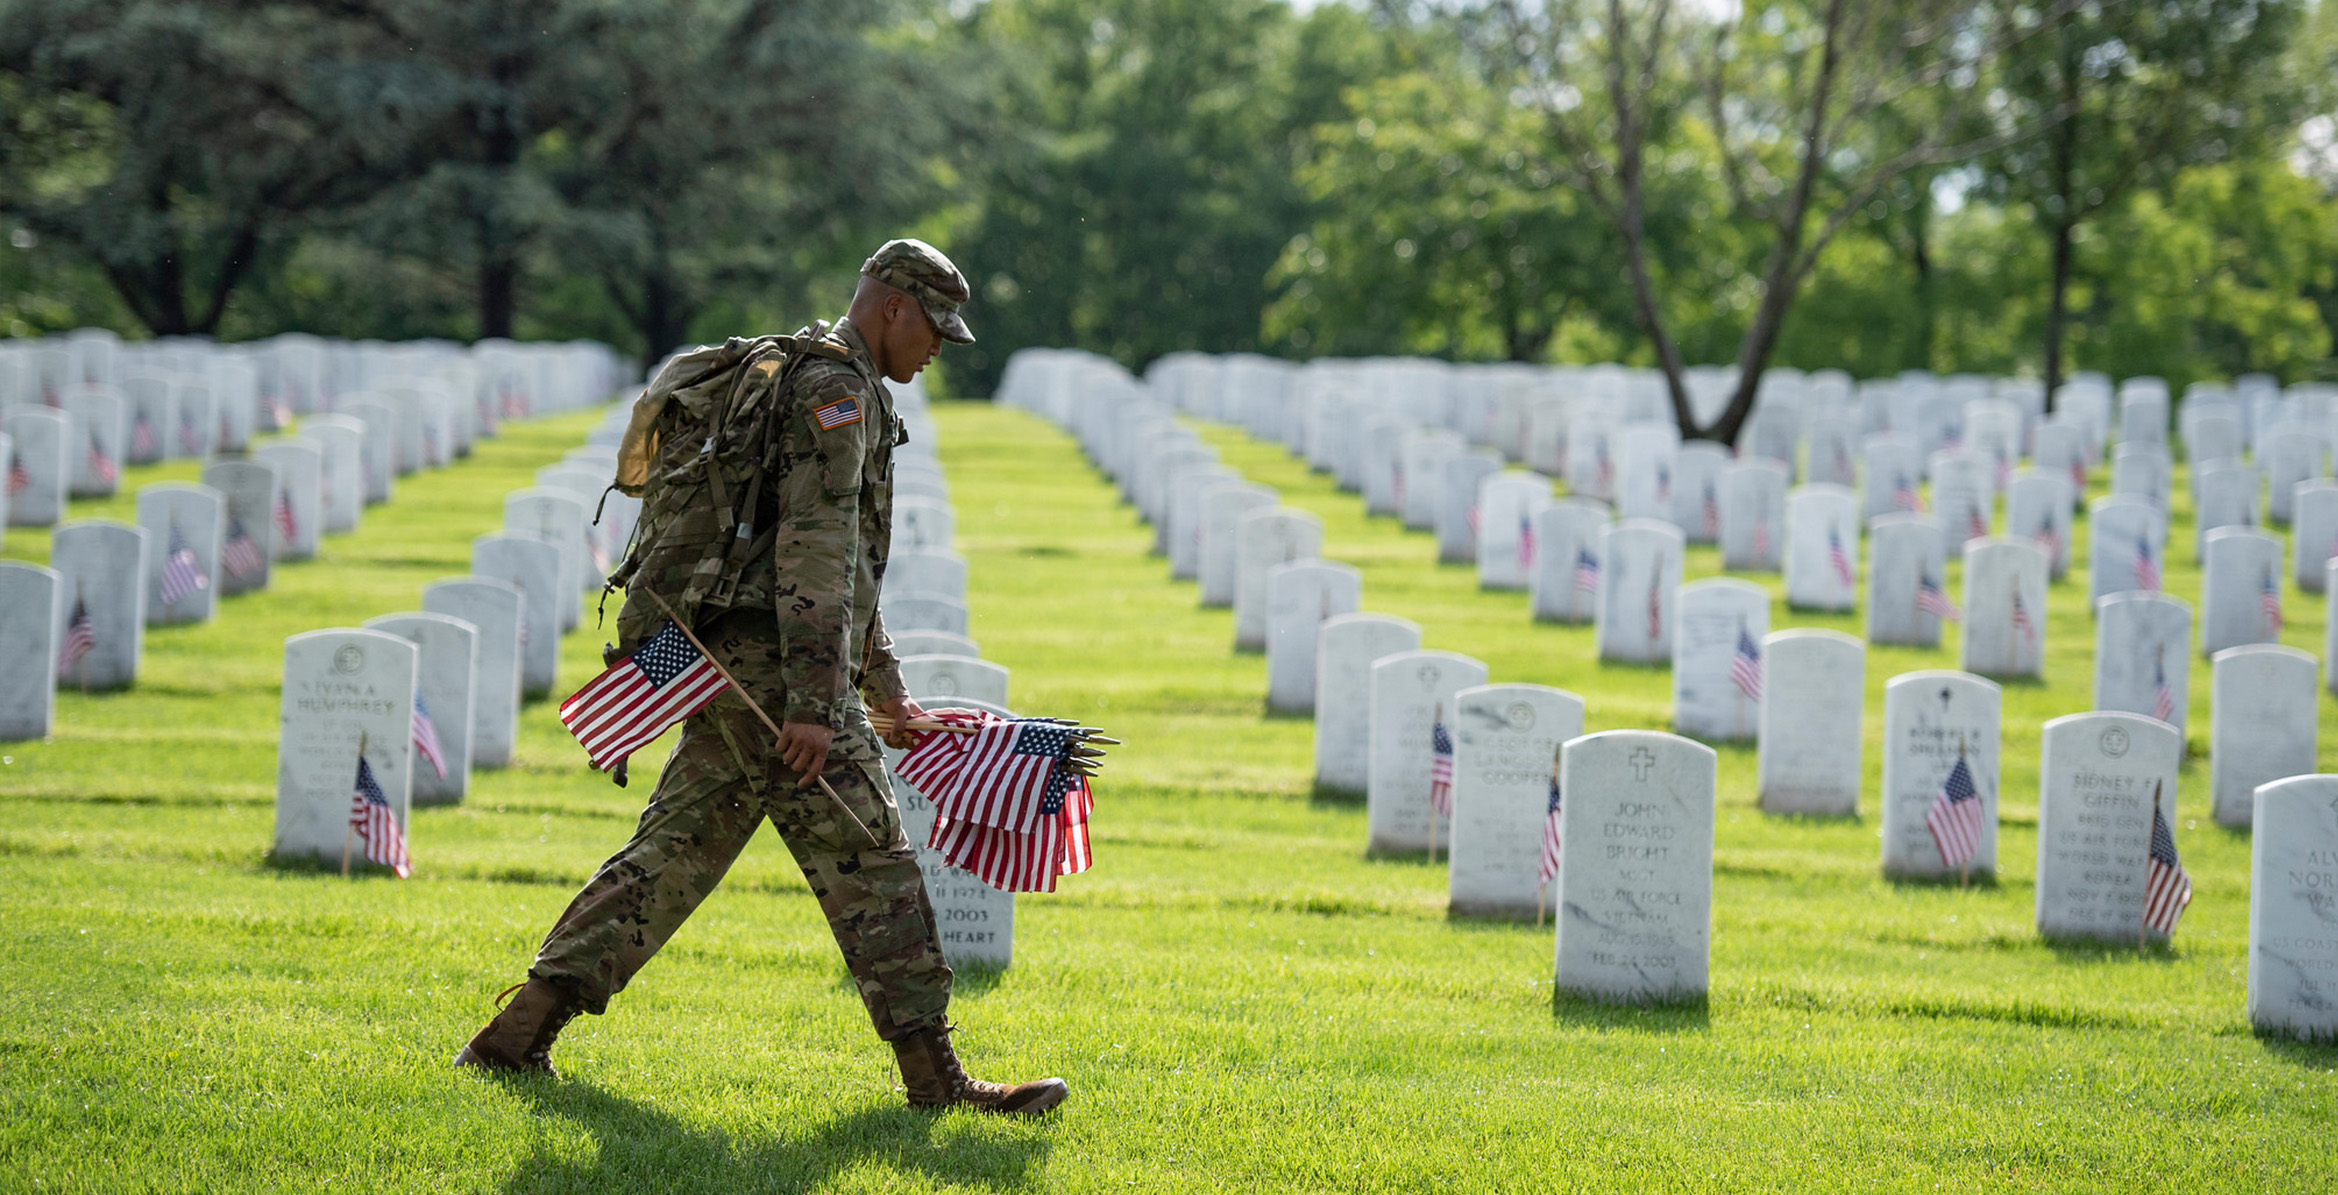 Service member placing flags on Memorial Day